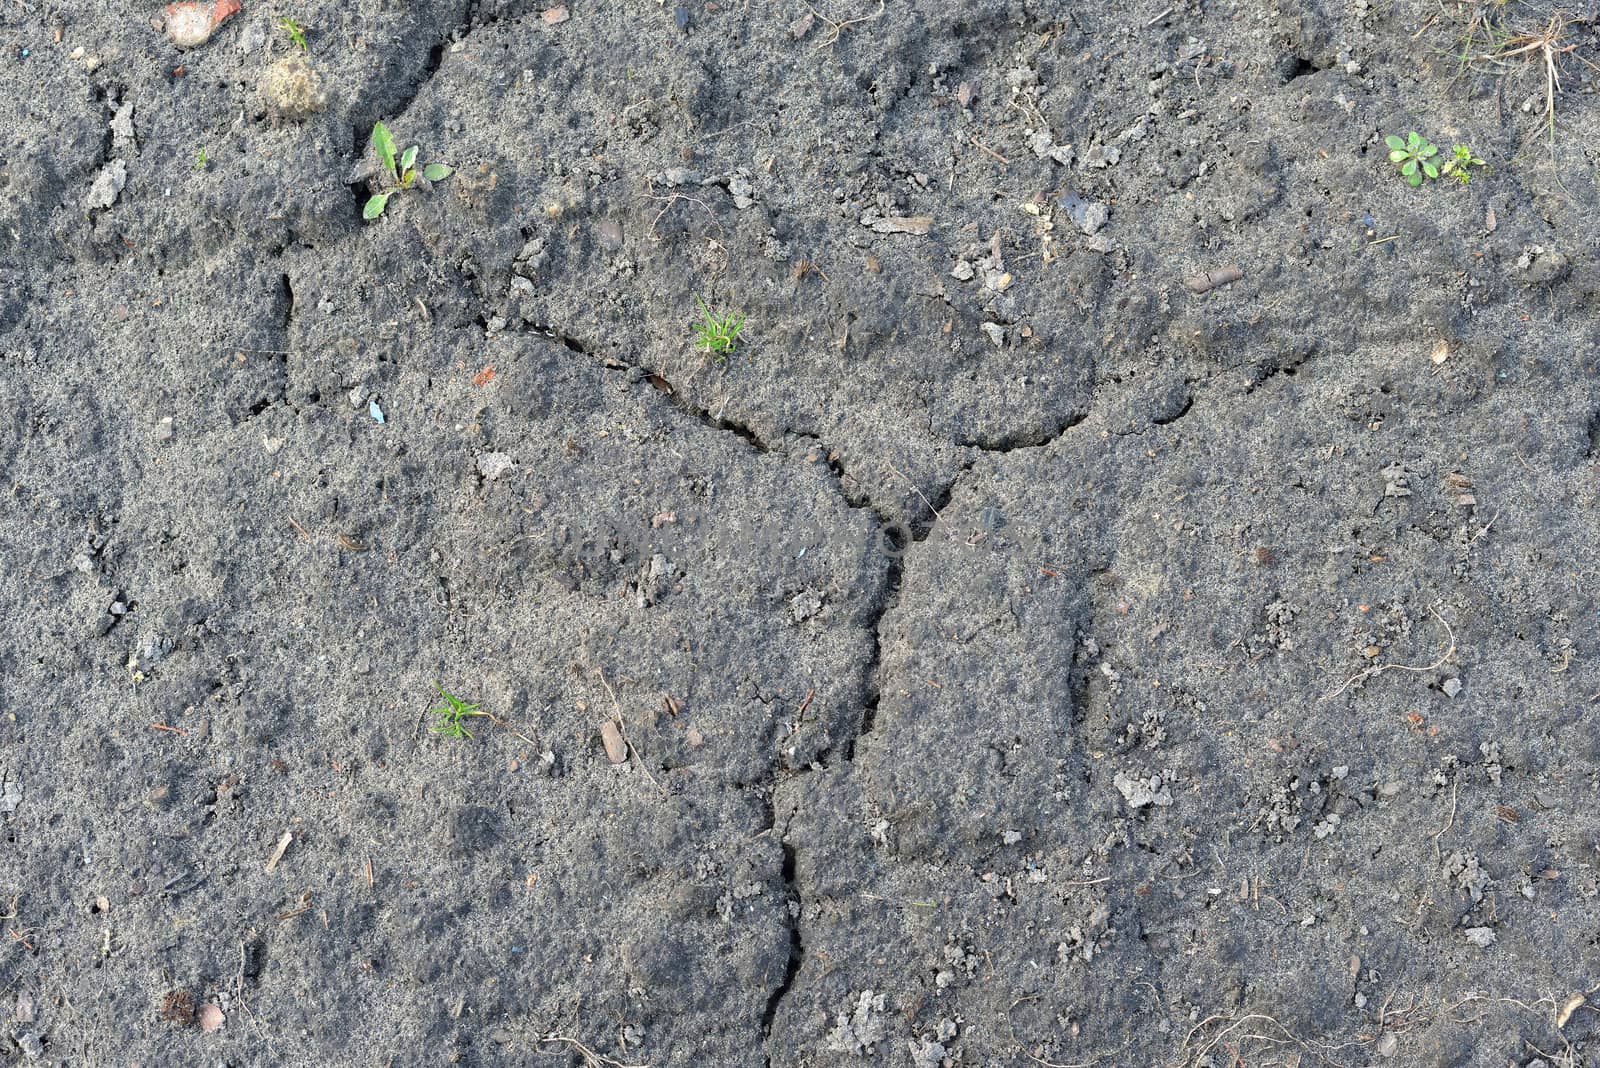 Chapped cultivated soil surface. The natural background